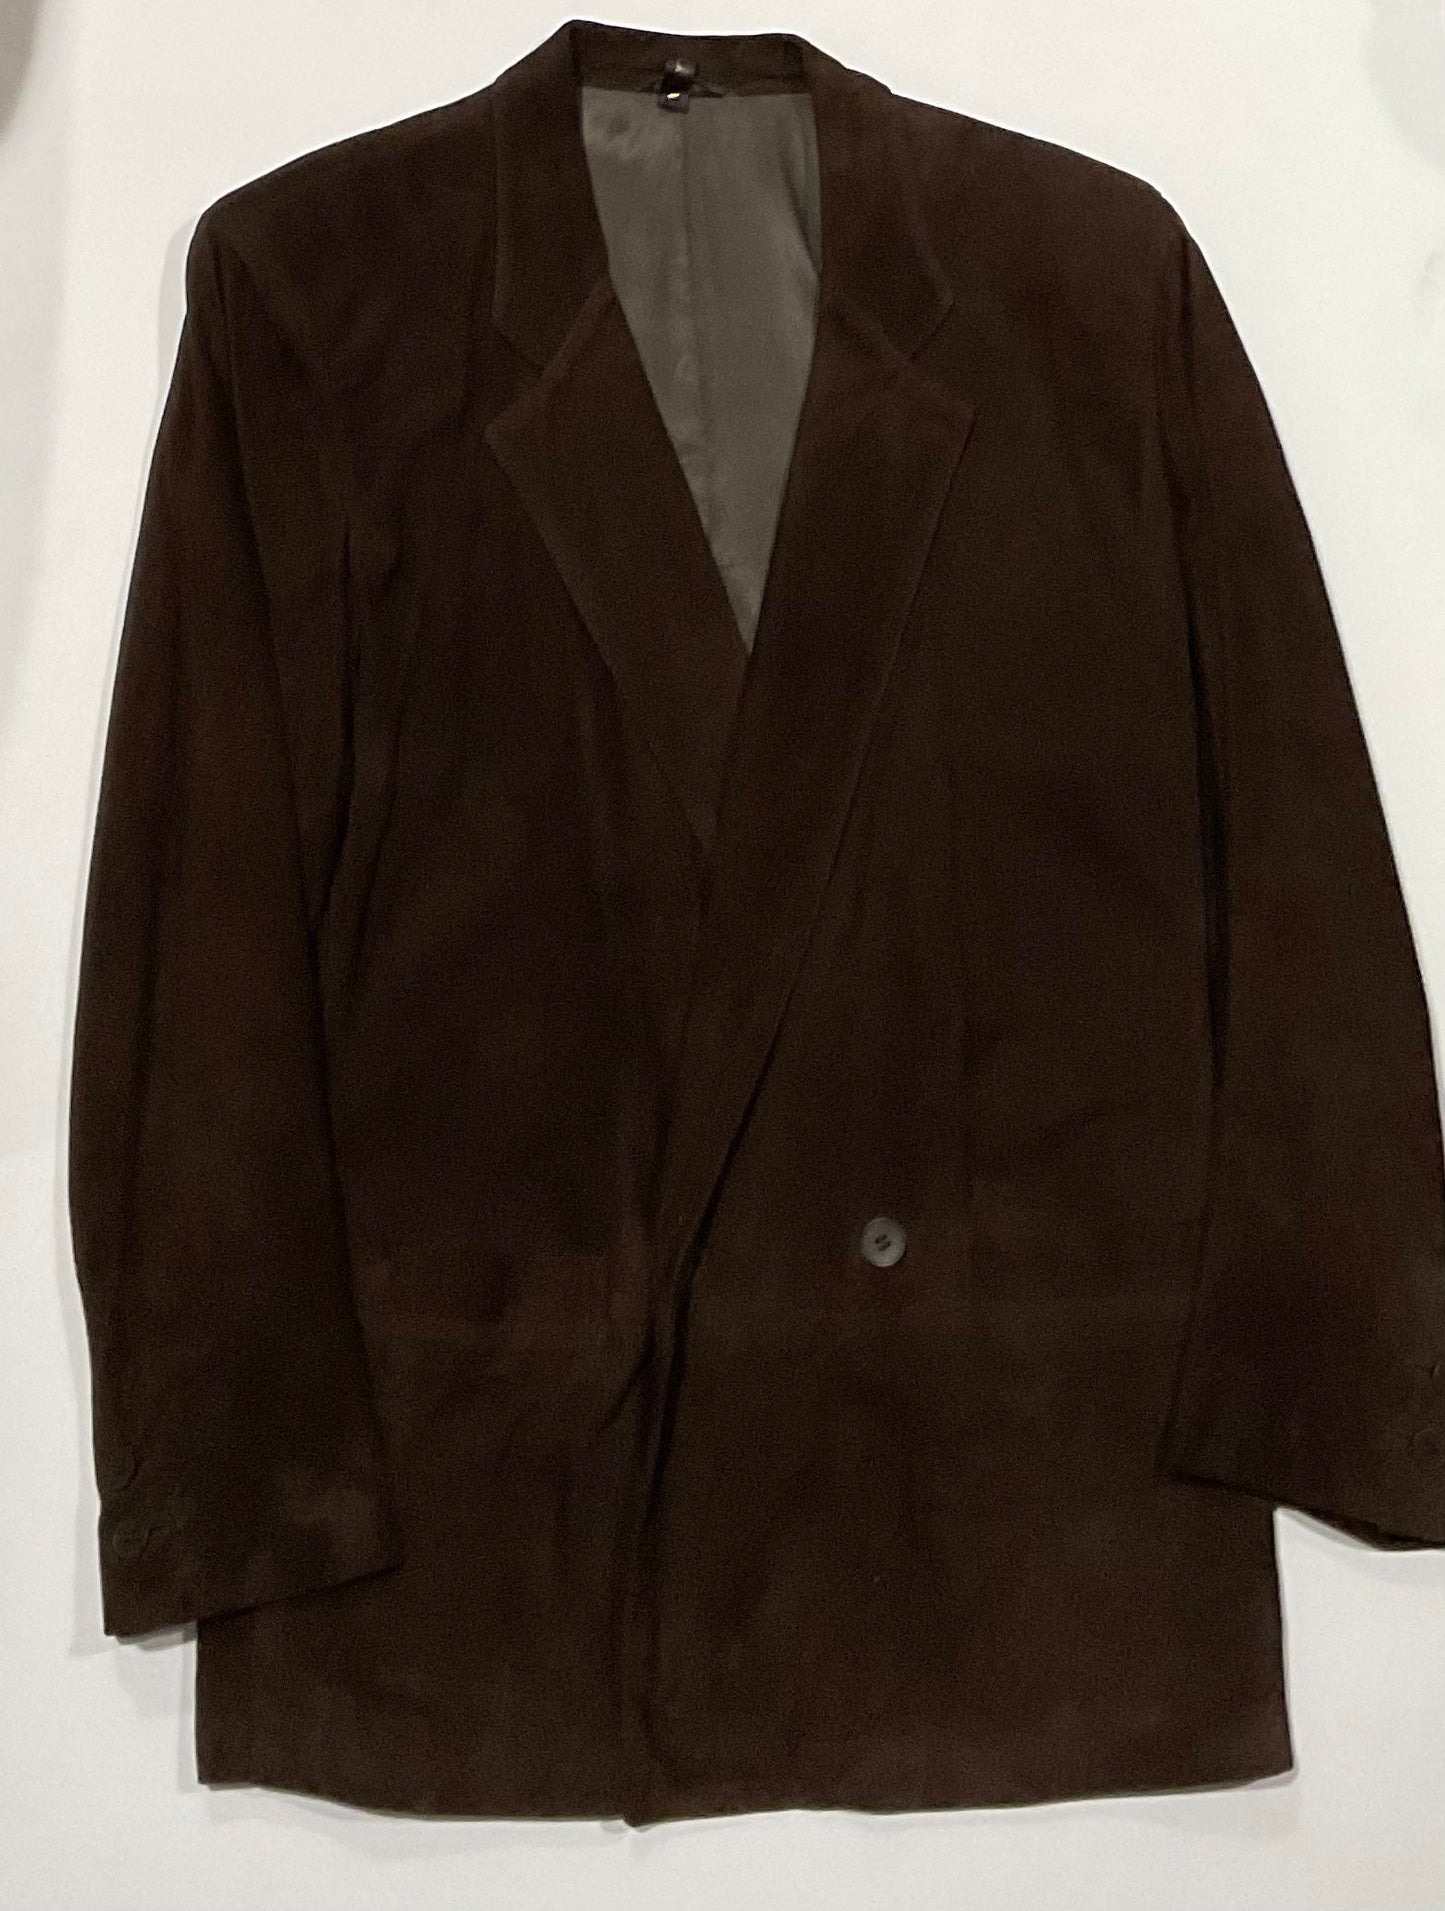 R P SUEDE DOUBLE BREASTED BLAZER JACKET / BROWN / MEDIUM / MADE IN ITALY